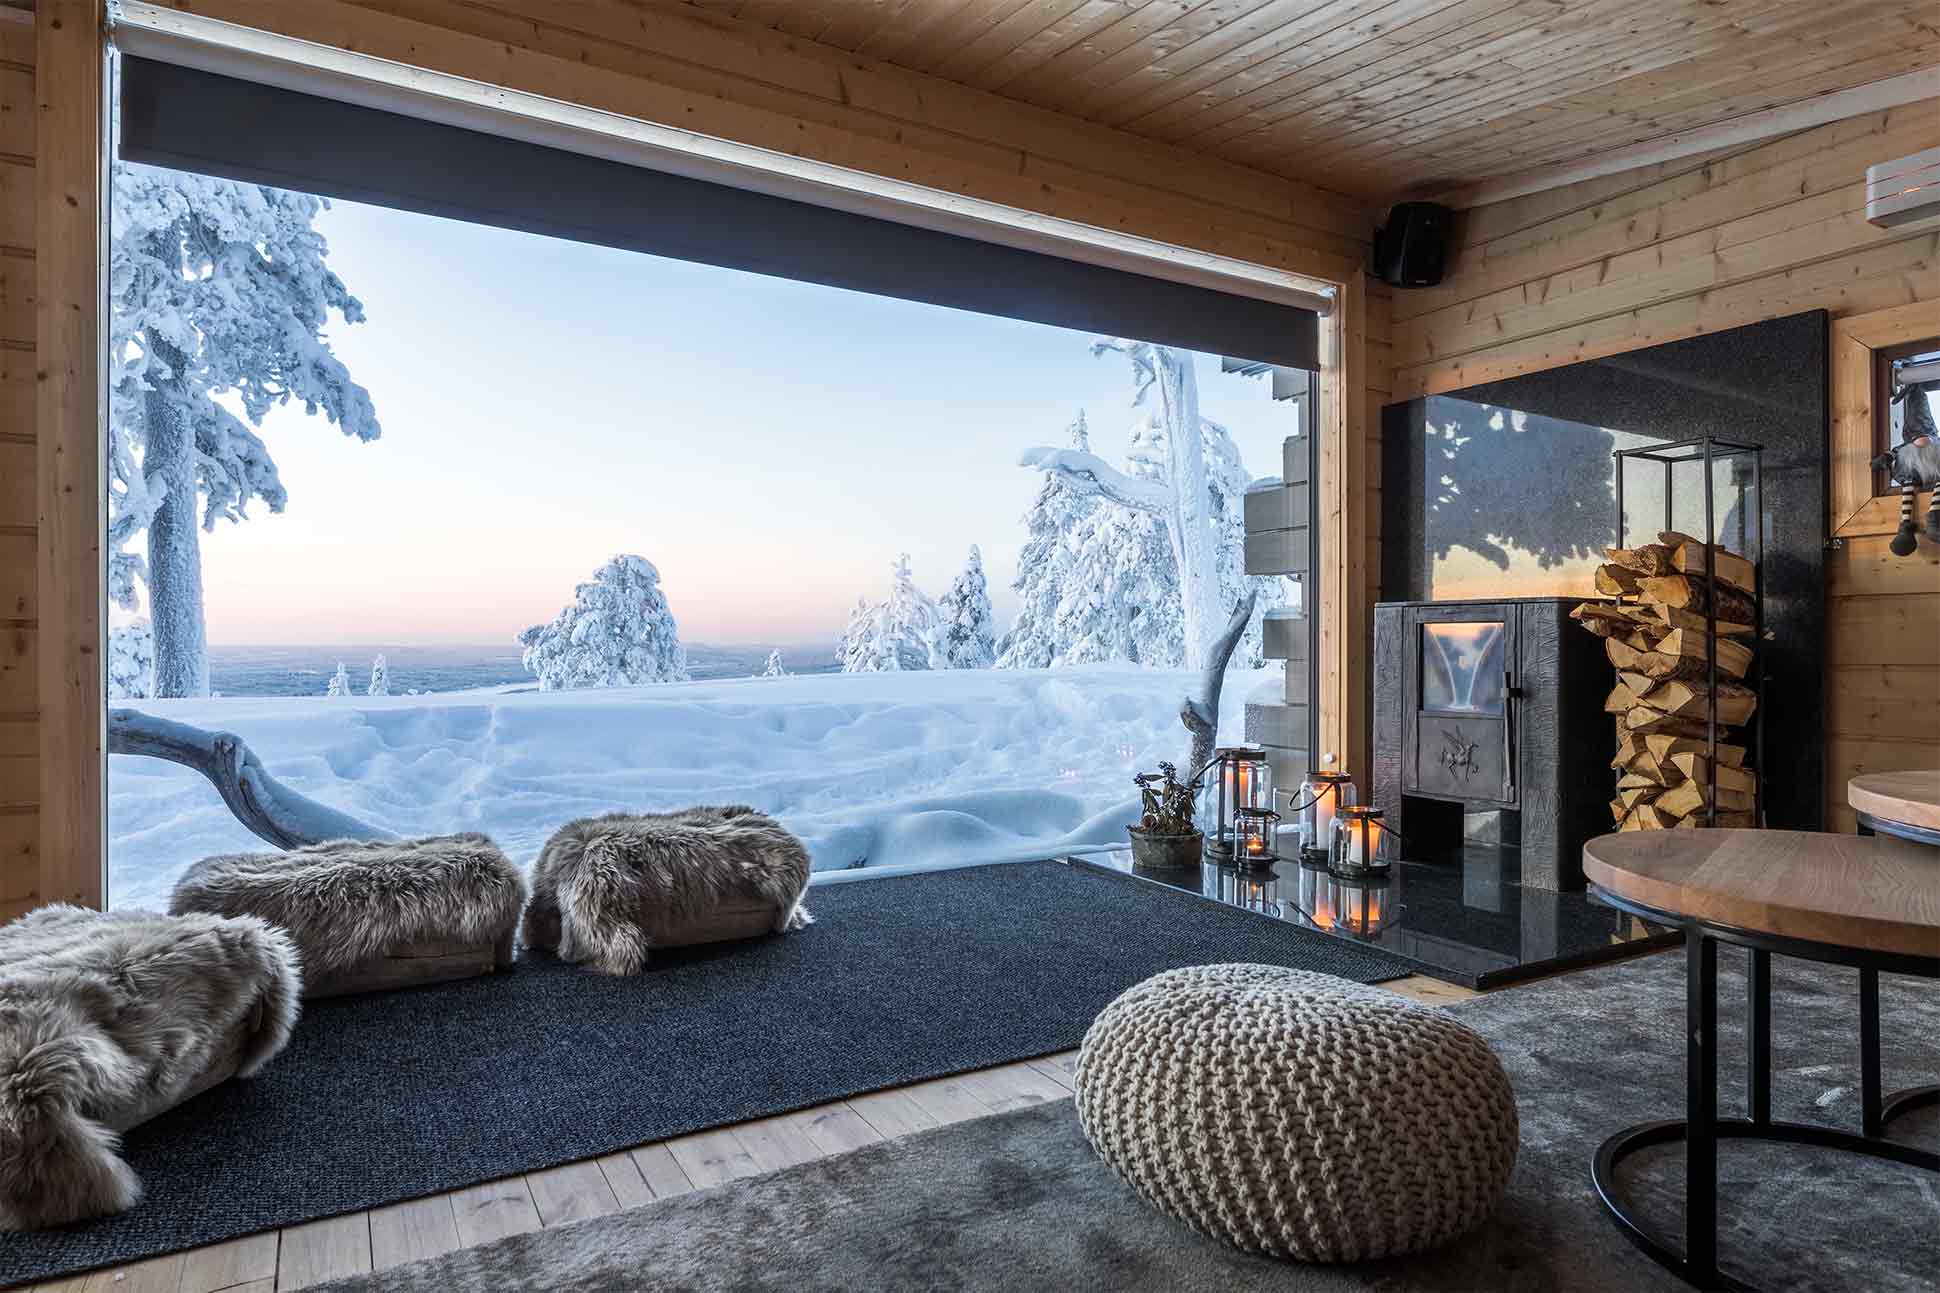 Room with a view in Finnish Lapland, Finland